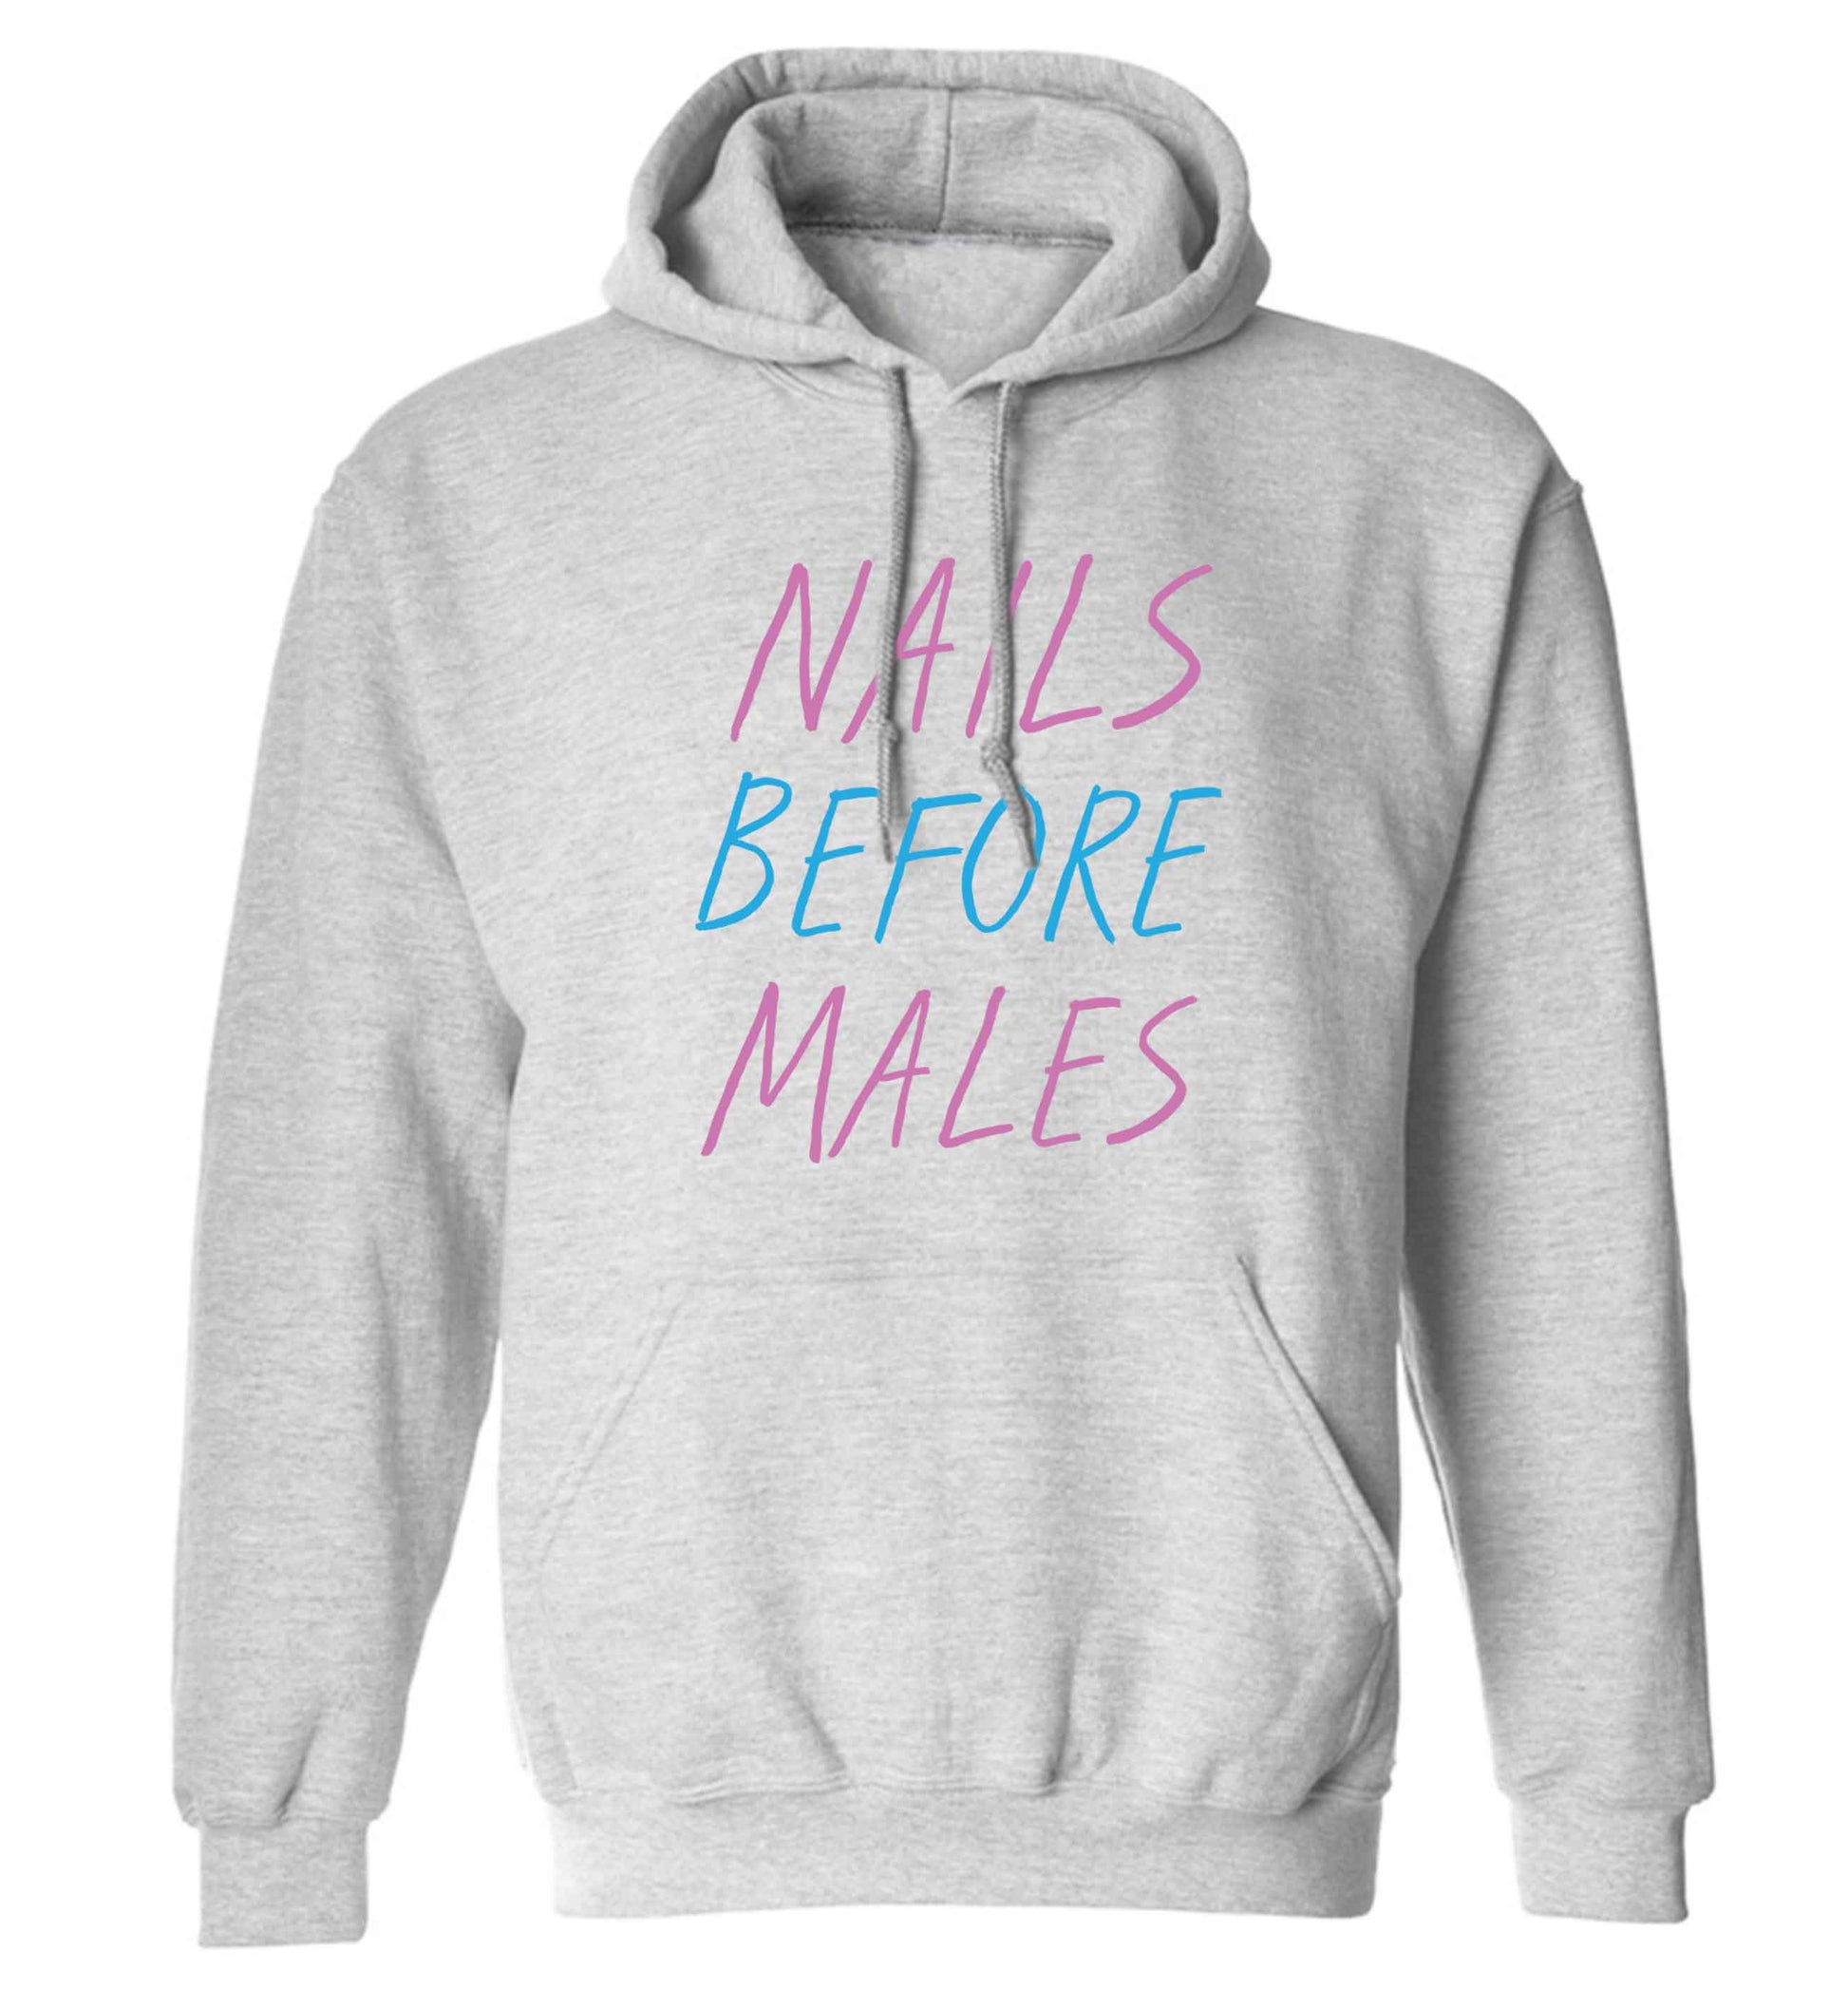 Nails before males adults unisex grey hoodie 2XL